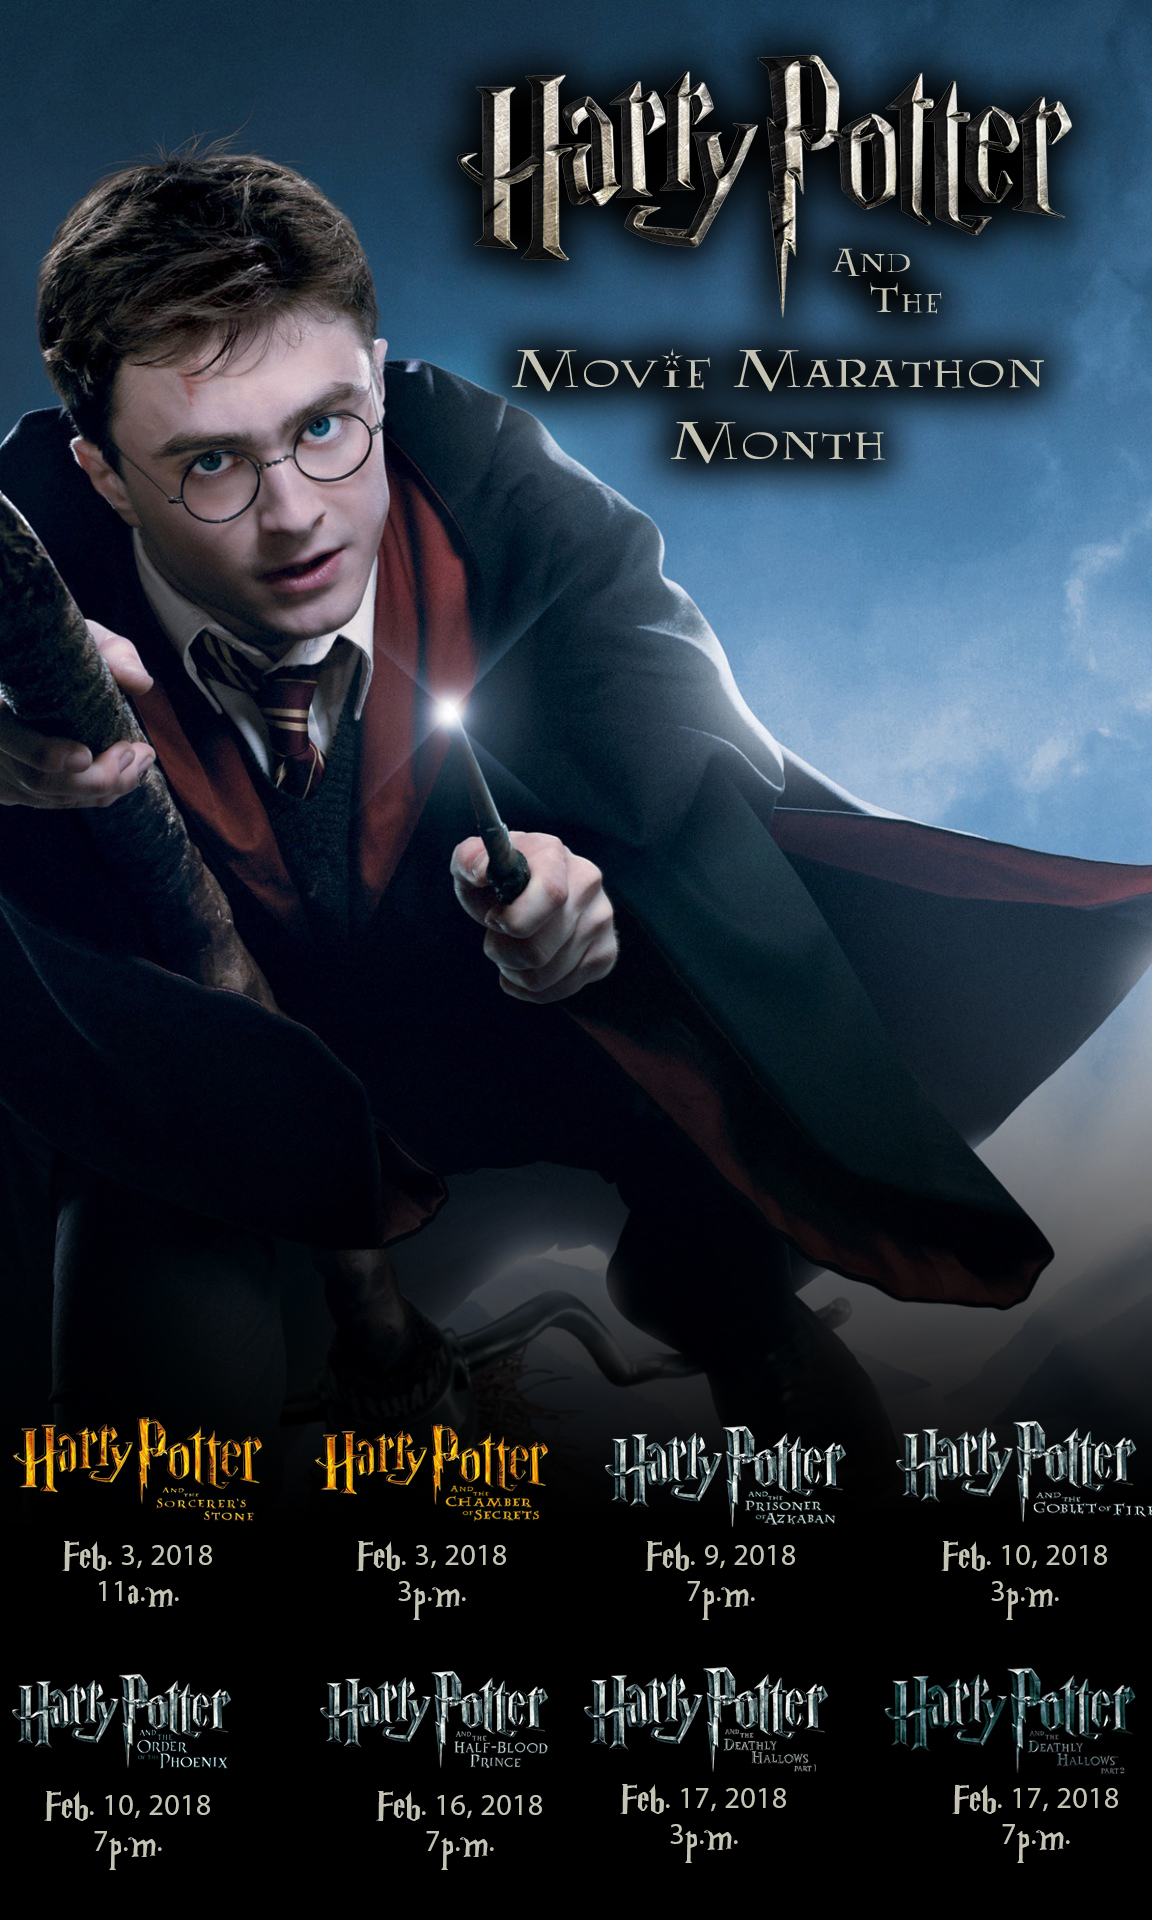 Harry Potter and the Movie Marathon Month | Lucas Theatre for the Arts